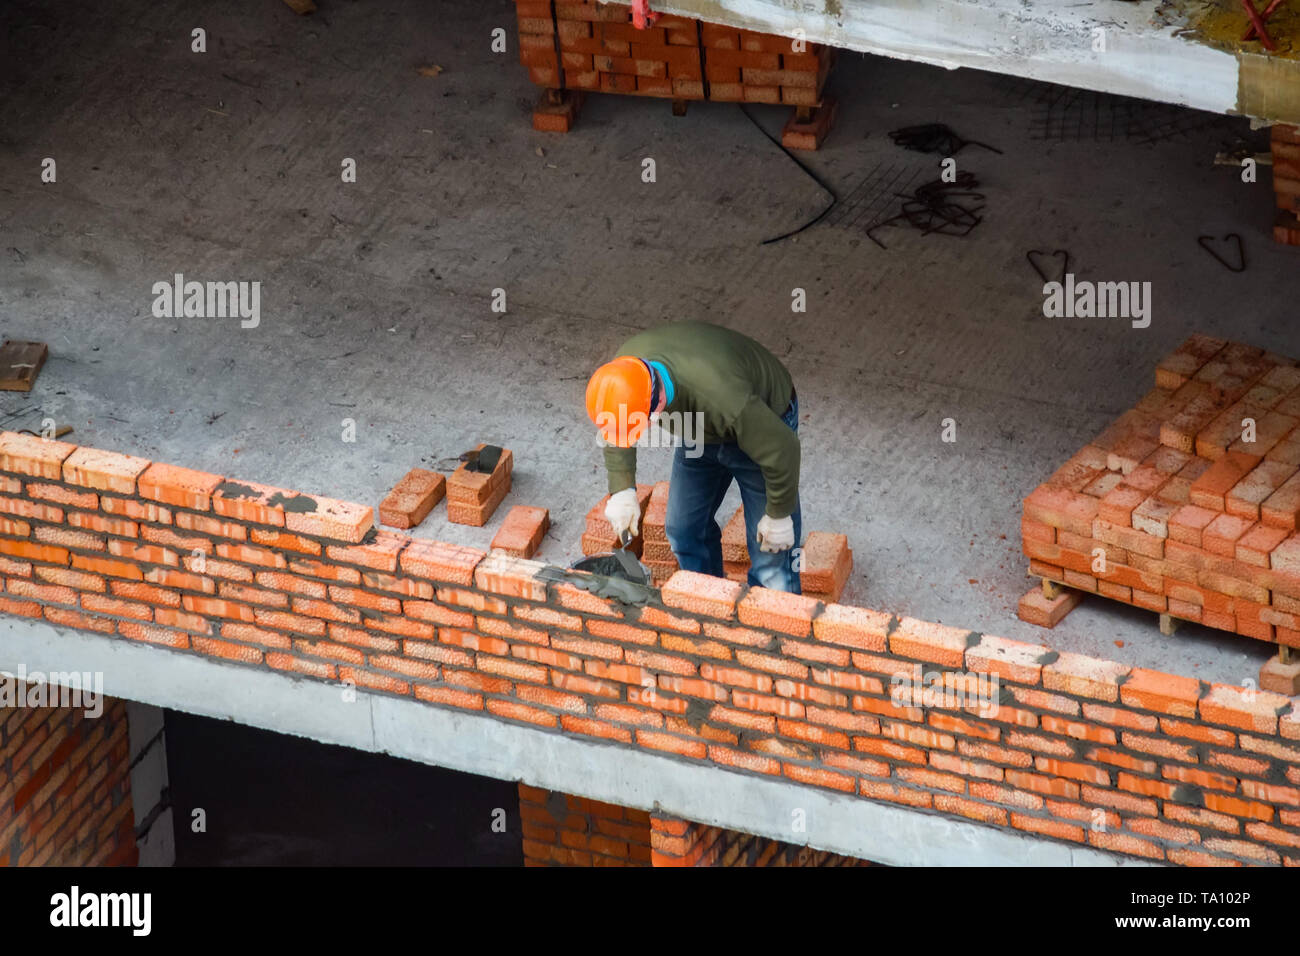 Worker Making Brick Wall At A New Building Construction Site Stock Photo Alamy